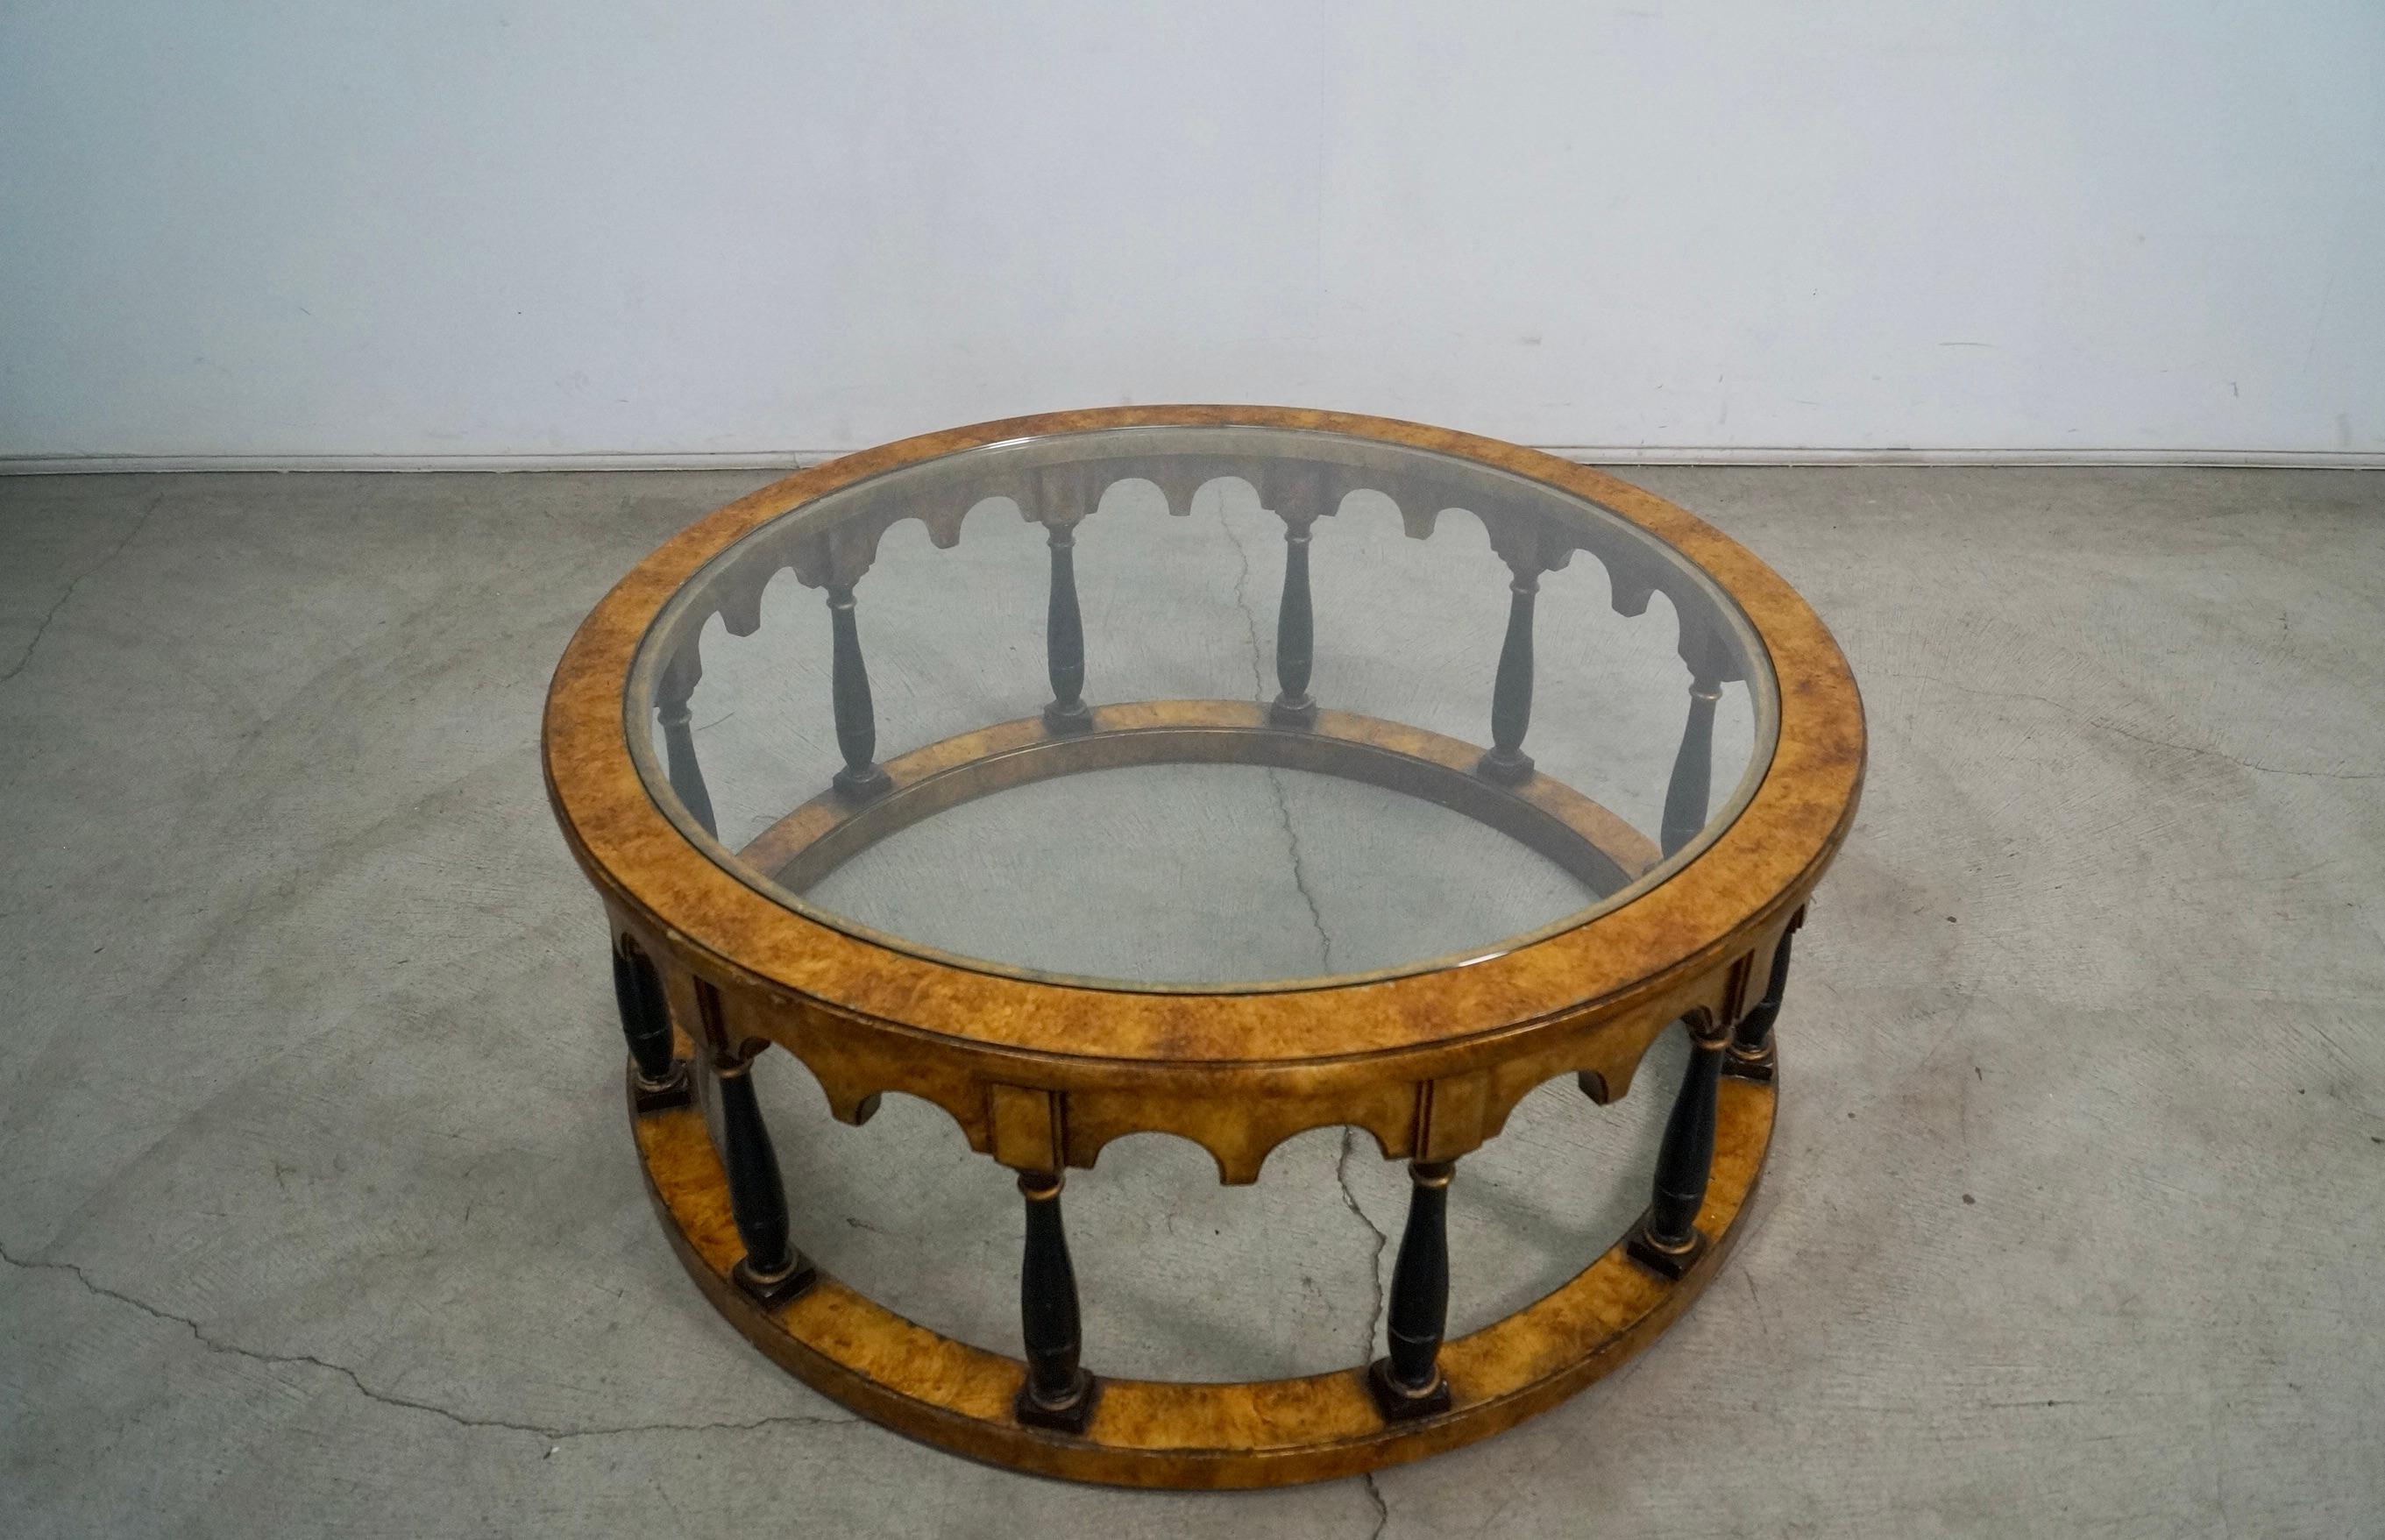 Vintage Mid century round coffee table for sale. From the 1960's, and very rare and beautiful. Has a gold leaf finish on the wood with black accents and gold. It's a very unique table that is very solid and well made. It's in excellent vintage